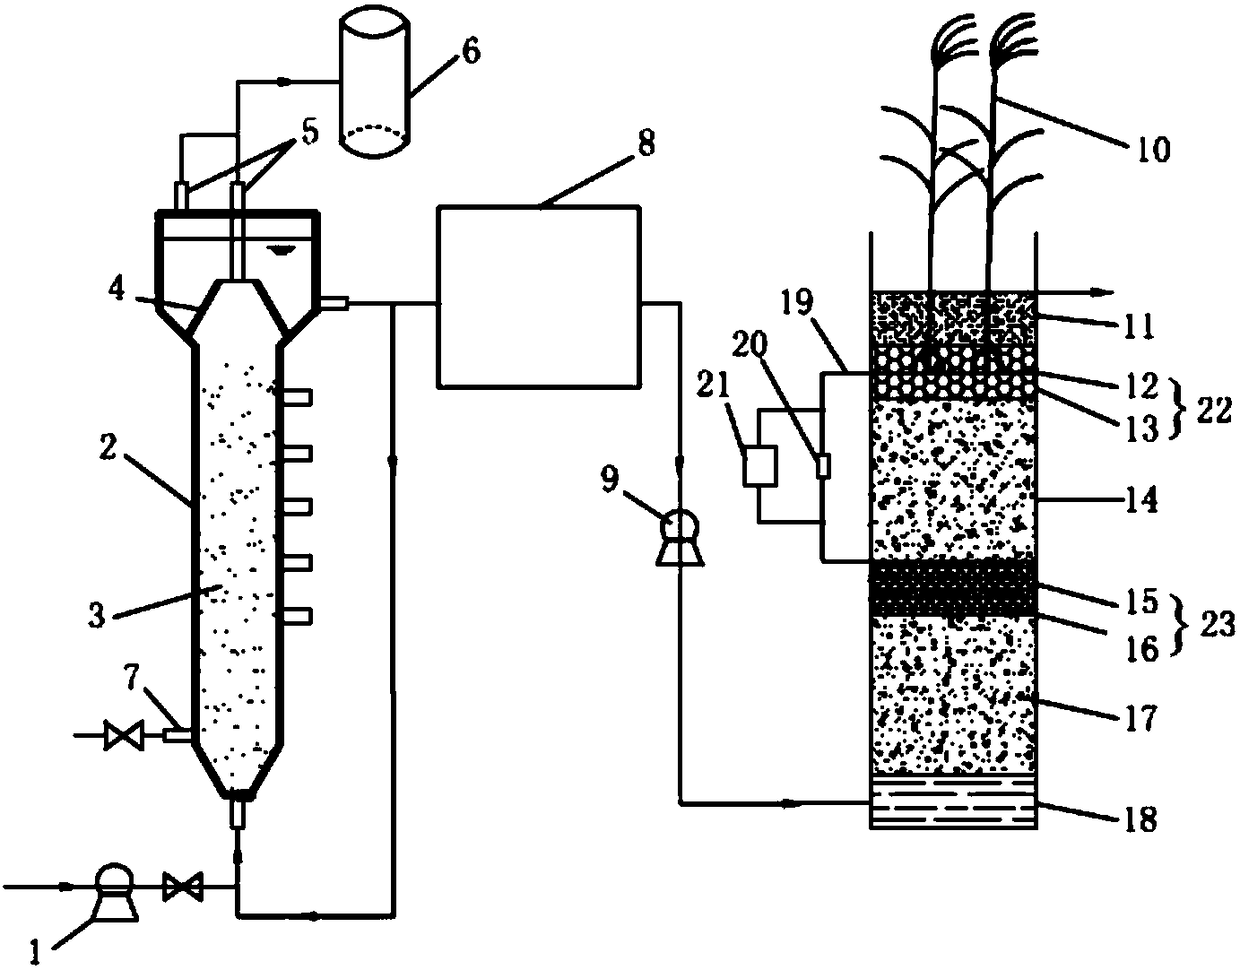 Anaerobic fluidized bed series constructed wetland type microbial fuel cell device and method